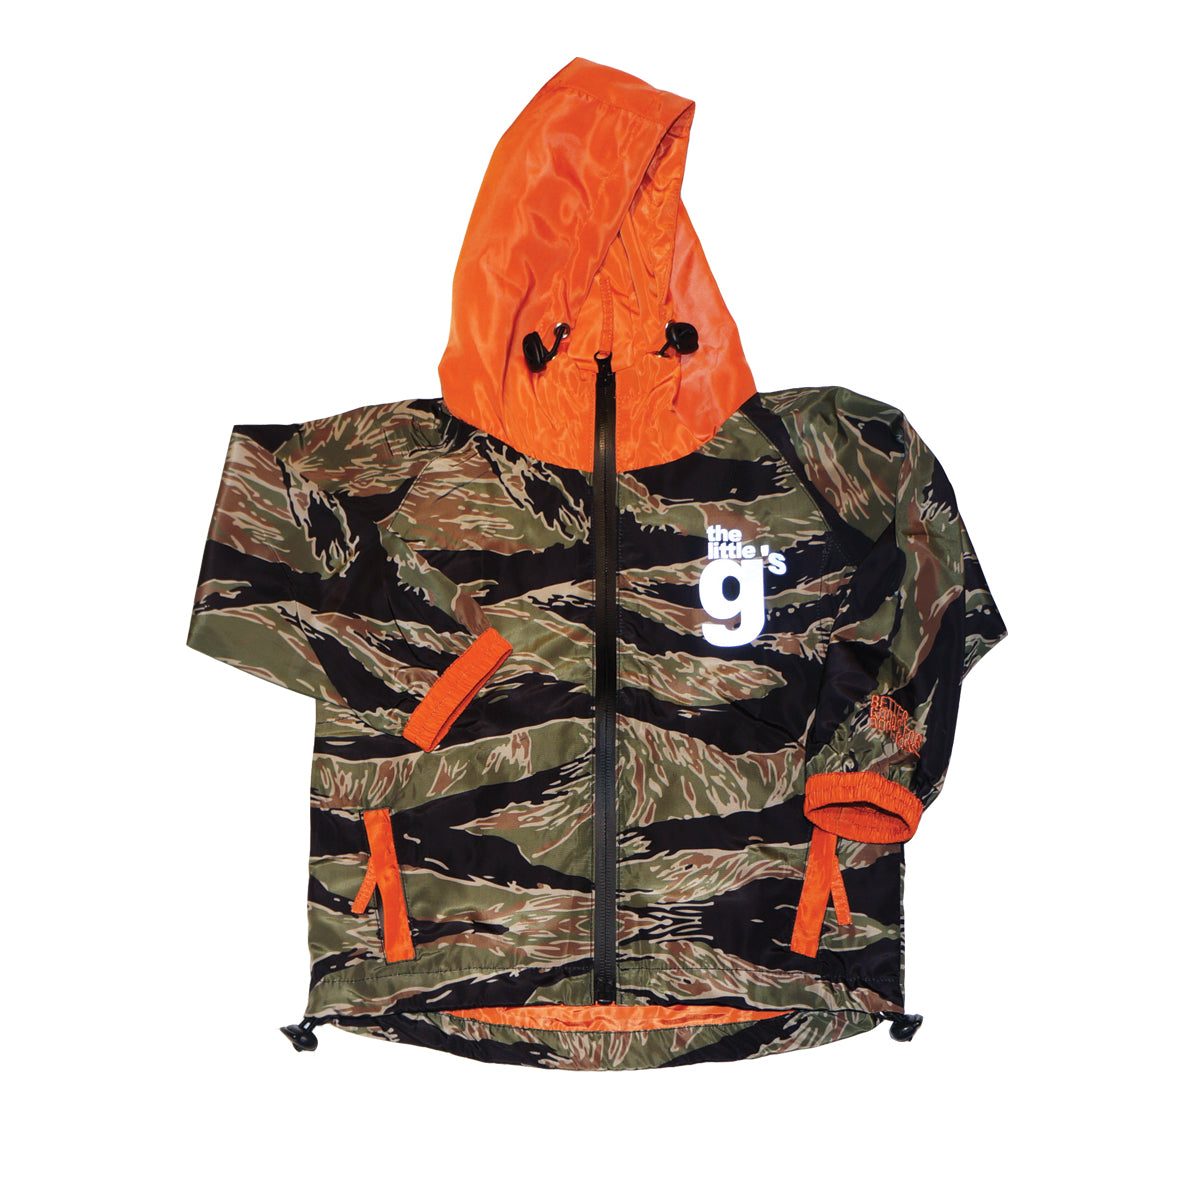 The Little g's Track Suit (Tiger Camo)